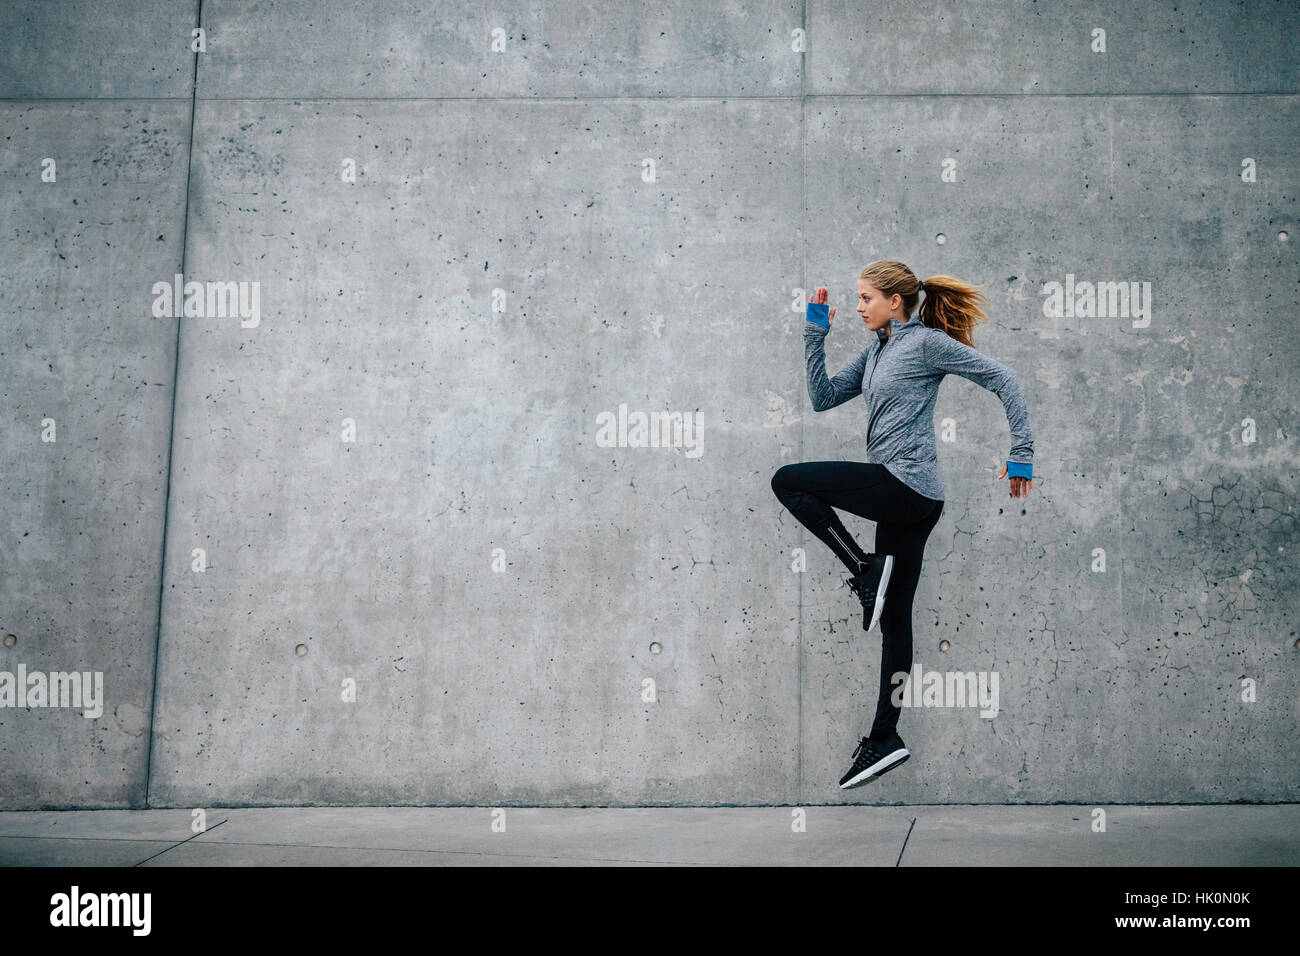 Side view shot of fitness female exercising outdoors in morning. Young woman running and jumping on city street. Stock Photo